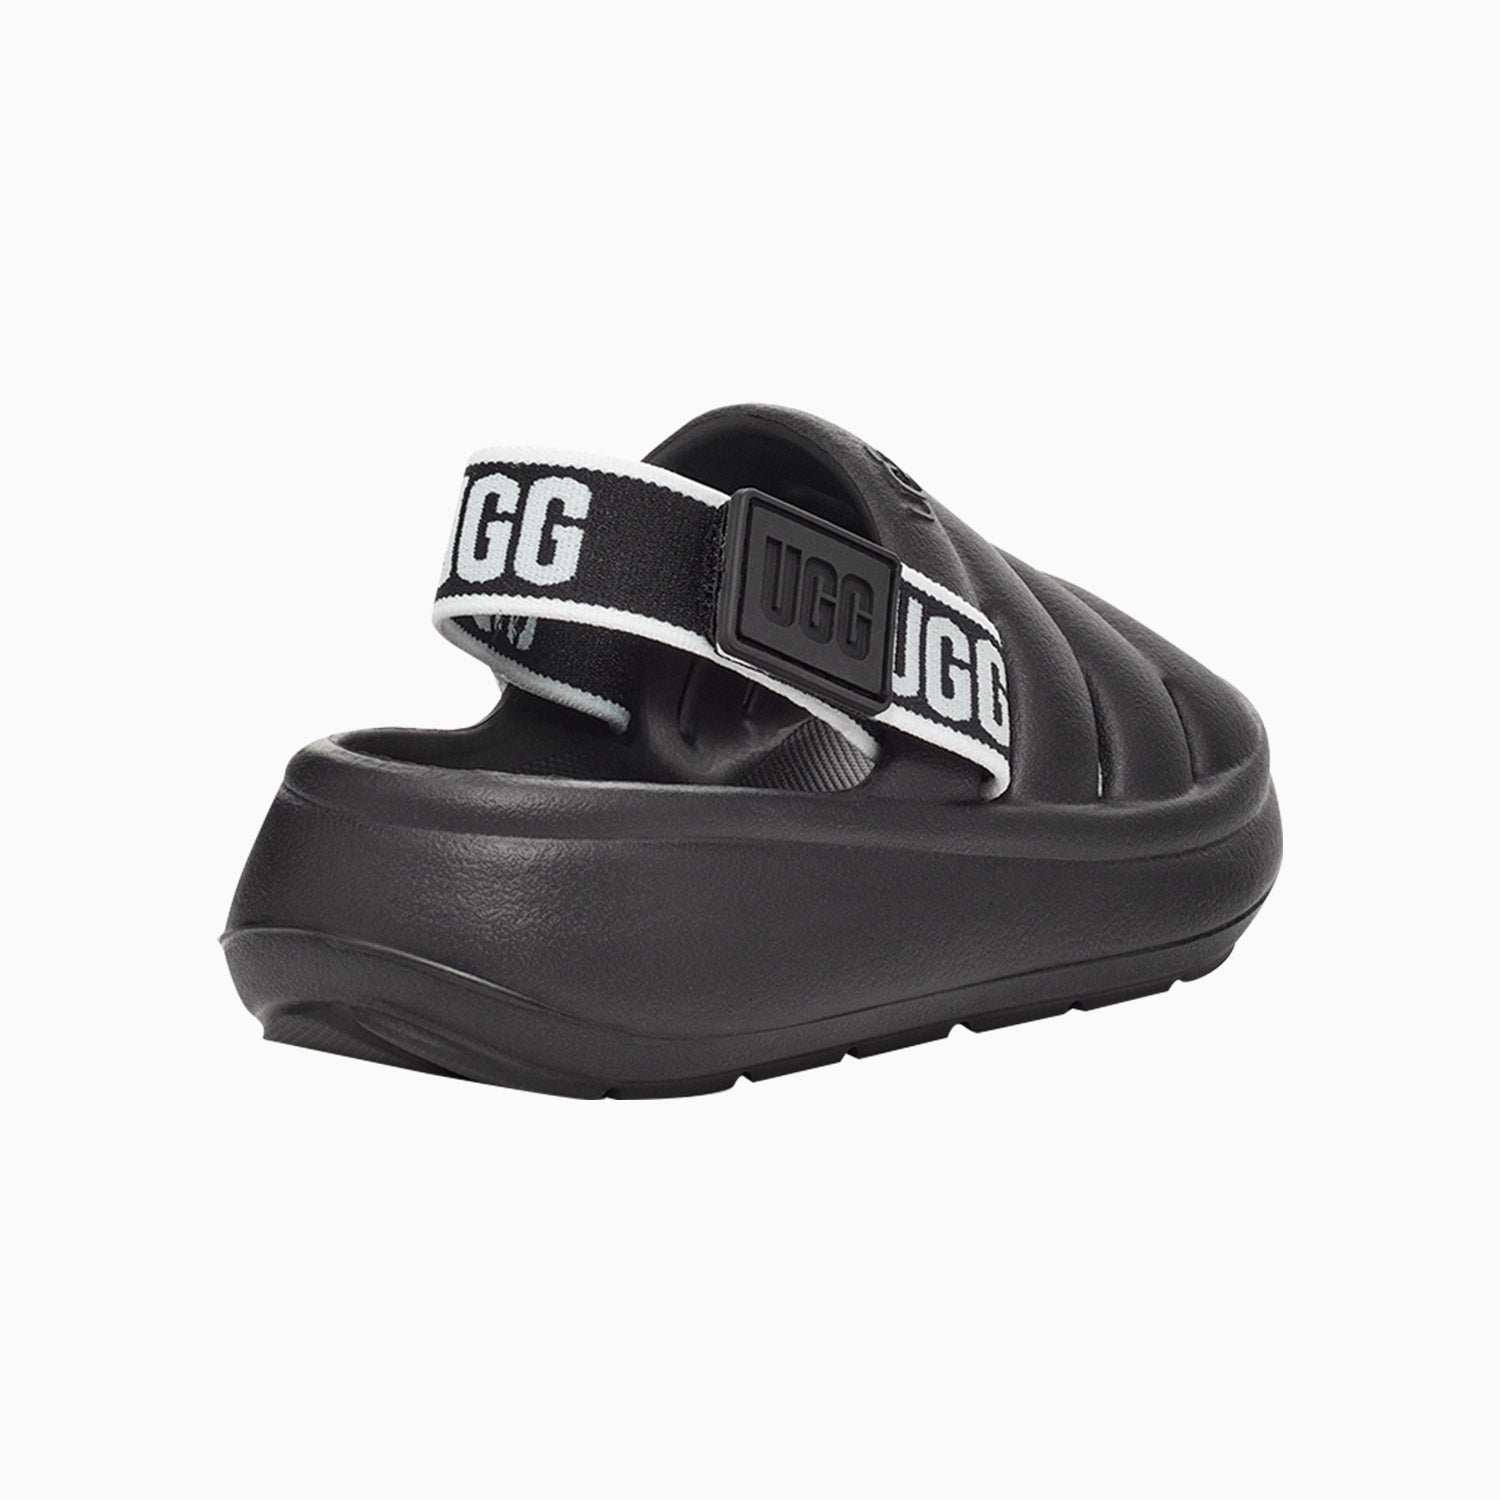 ugg-kids-sport-yeah-toddlers-1129050t-brwh-1129050t-blk